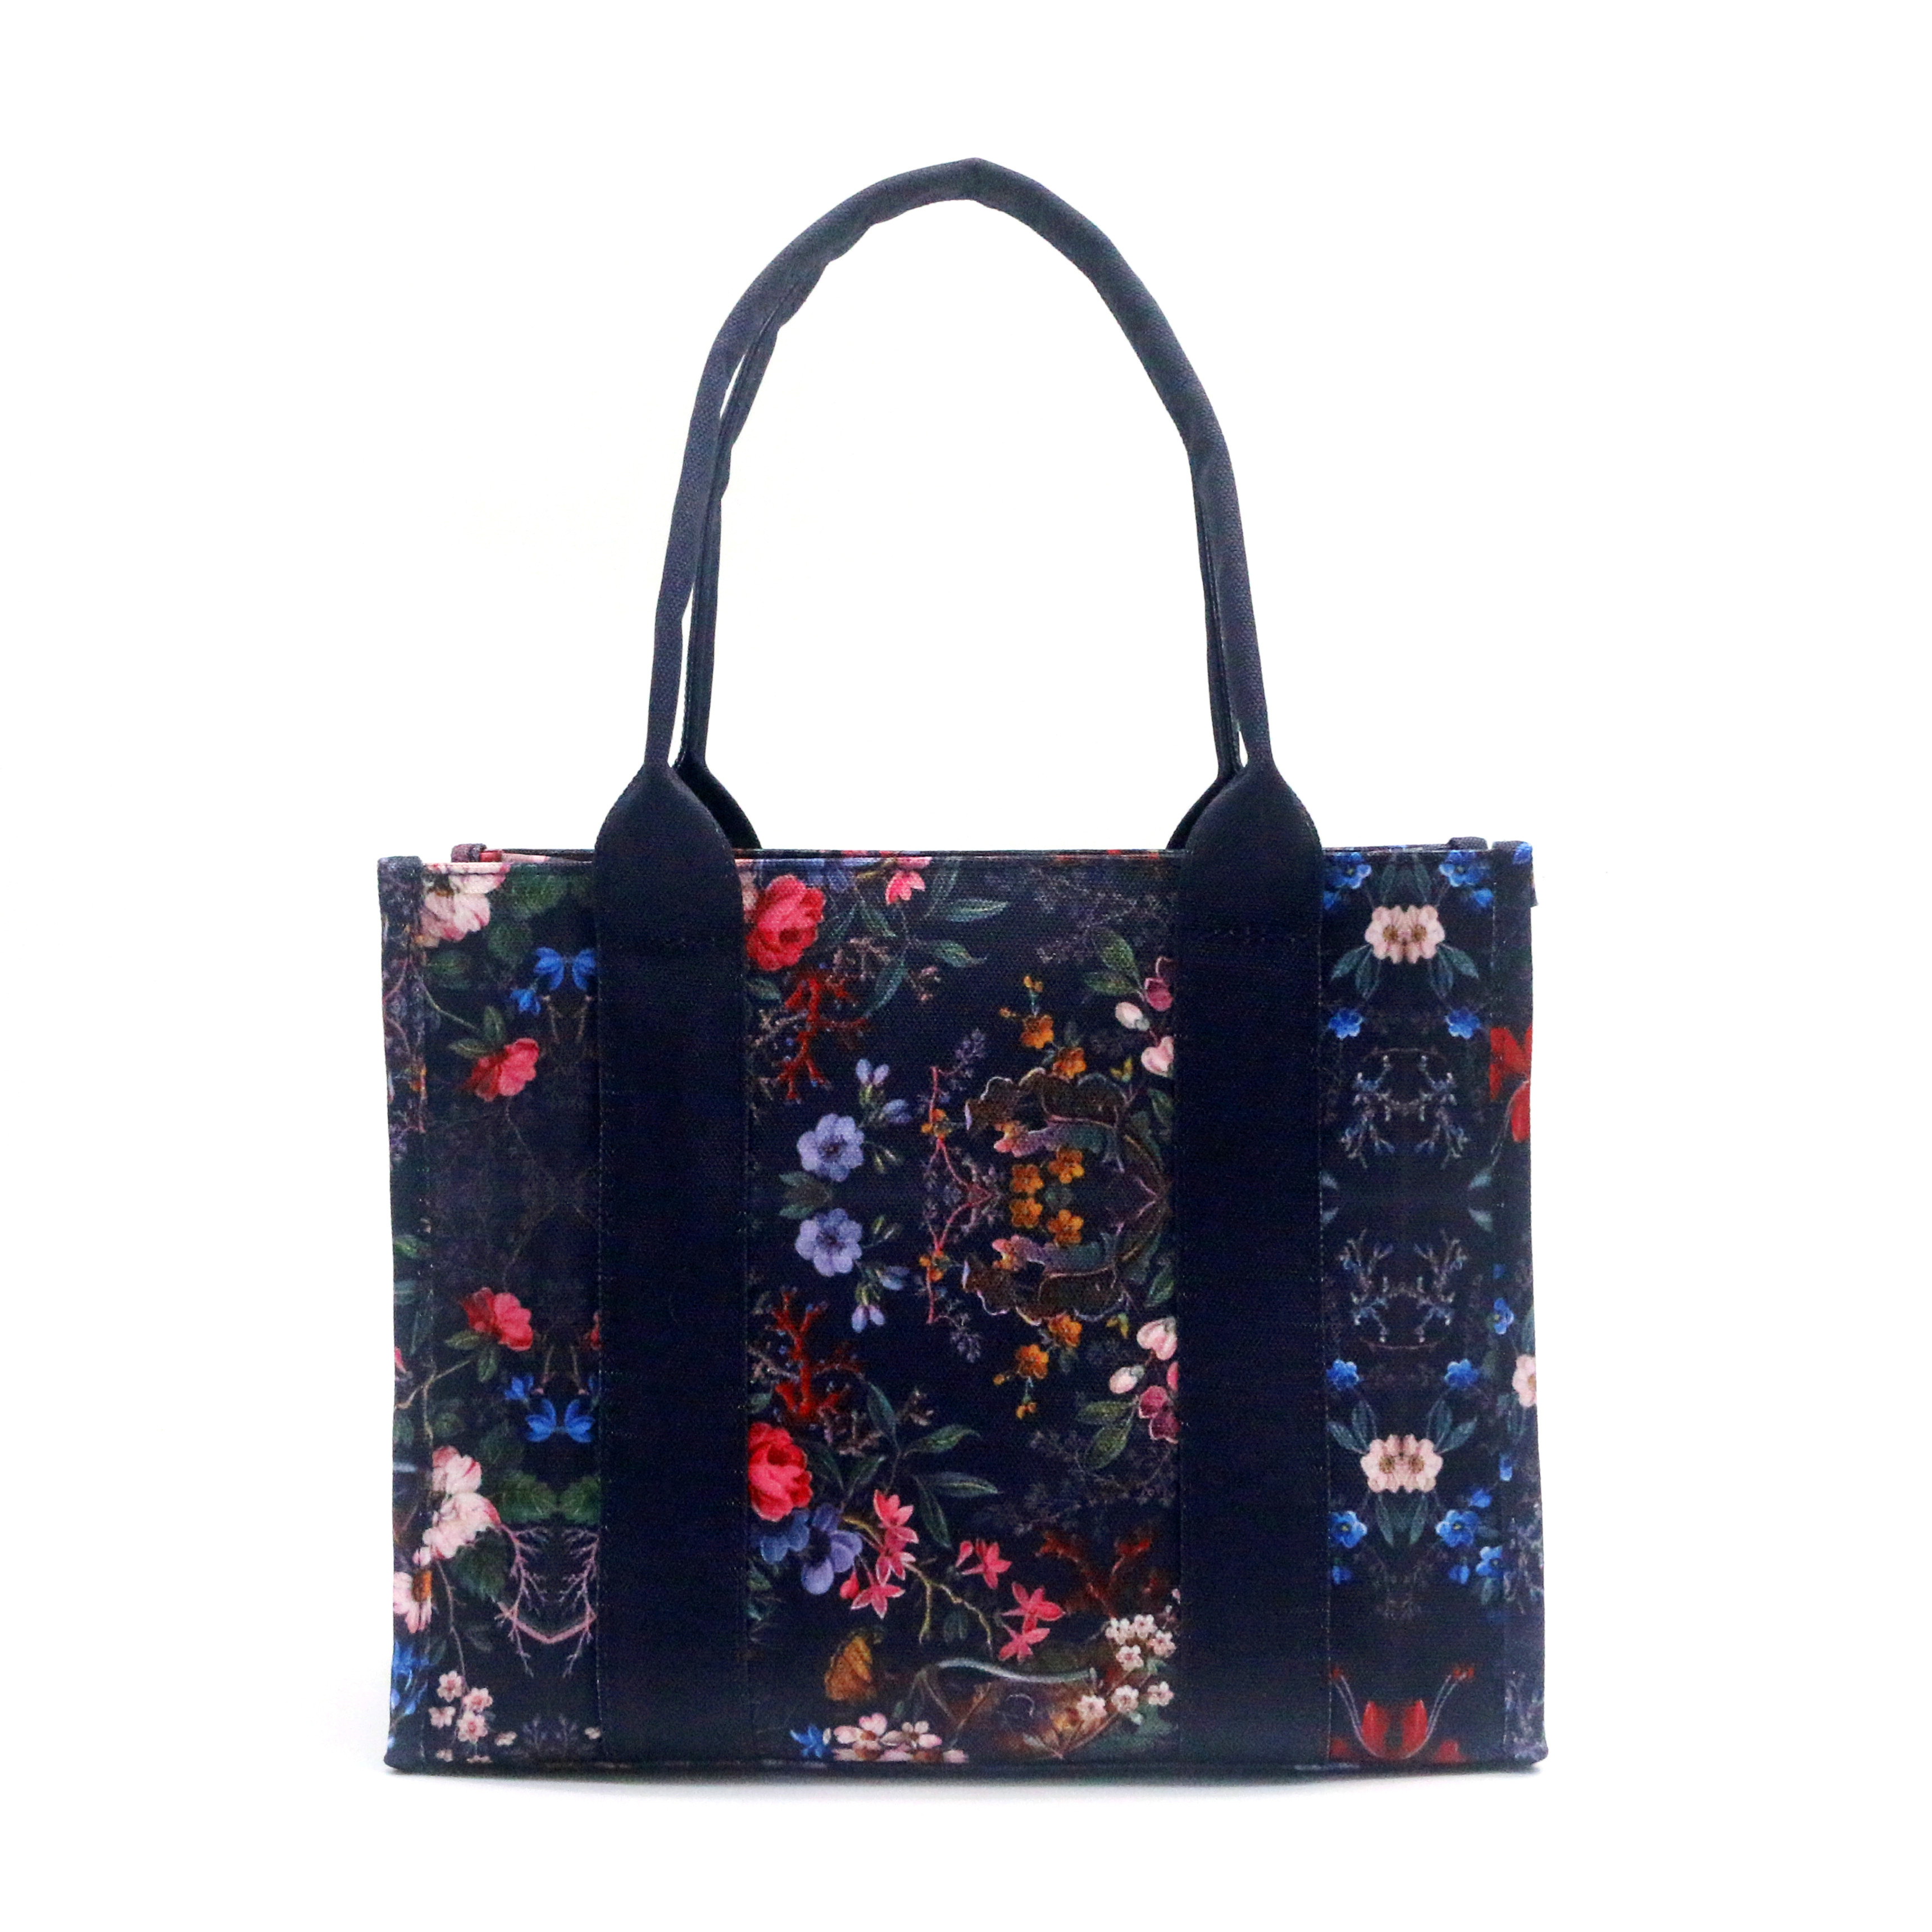 Fashion Flower Prints Large Canvas Shopping Bag Daily Use Flower Printing Bag Eco-friendly Cotton Canvas Women Tote Bag